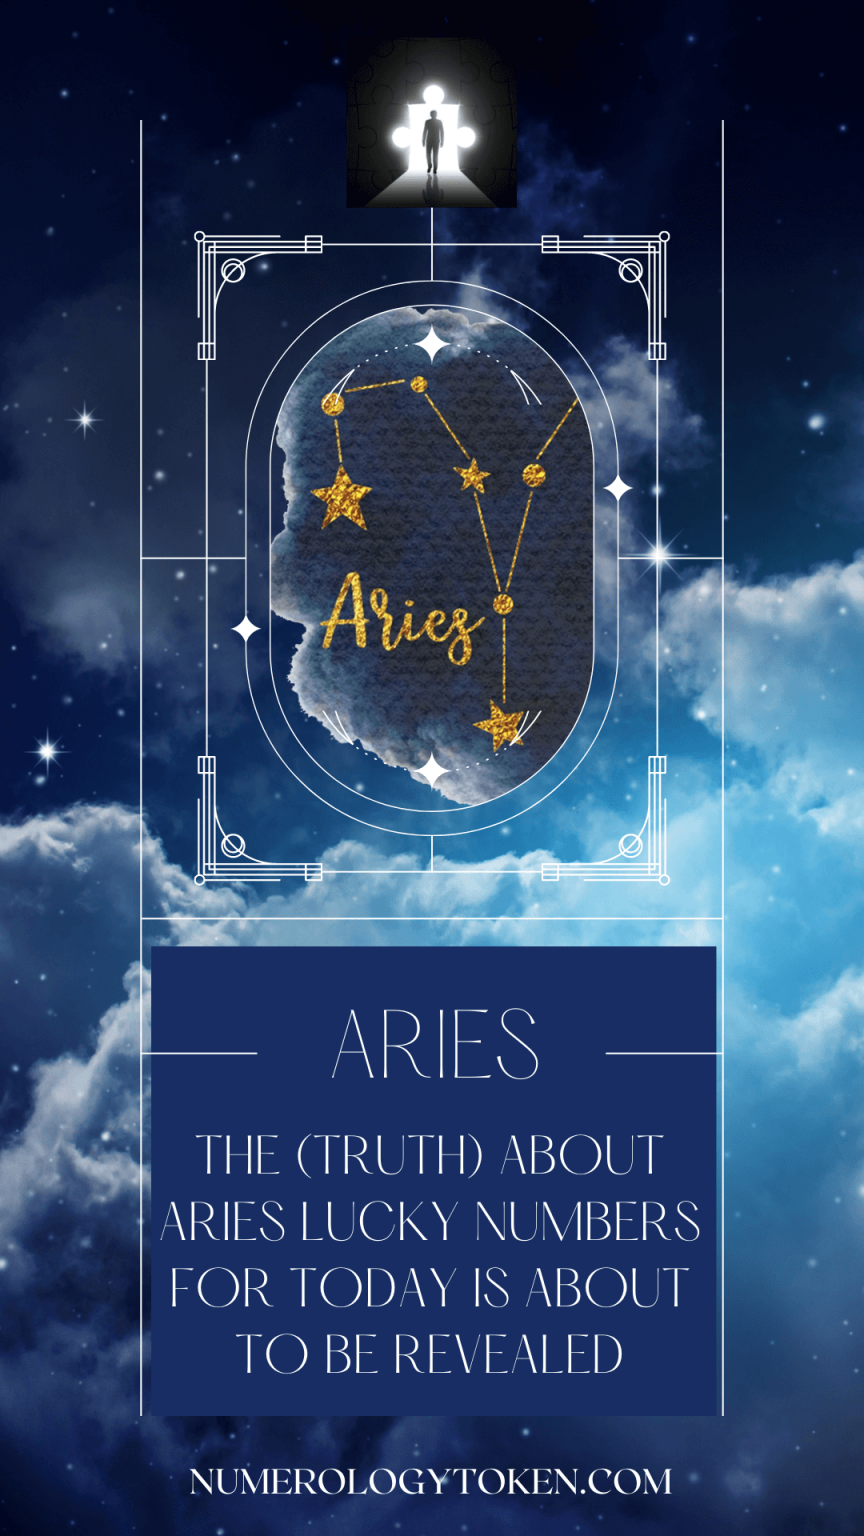 The (Truth) About Aries Lucky Numbers For Today Is About To Be Revealed